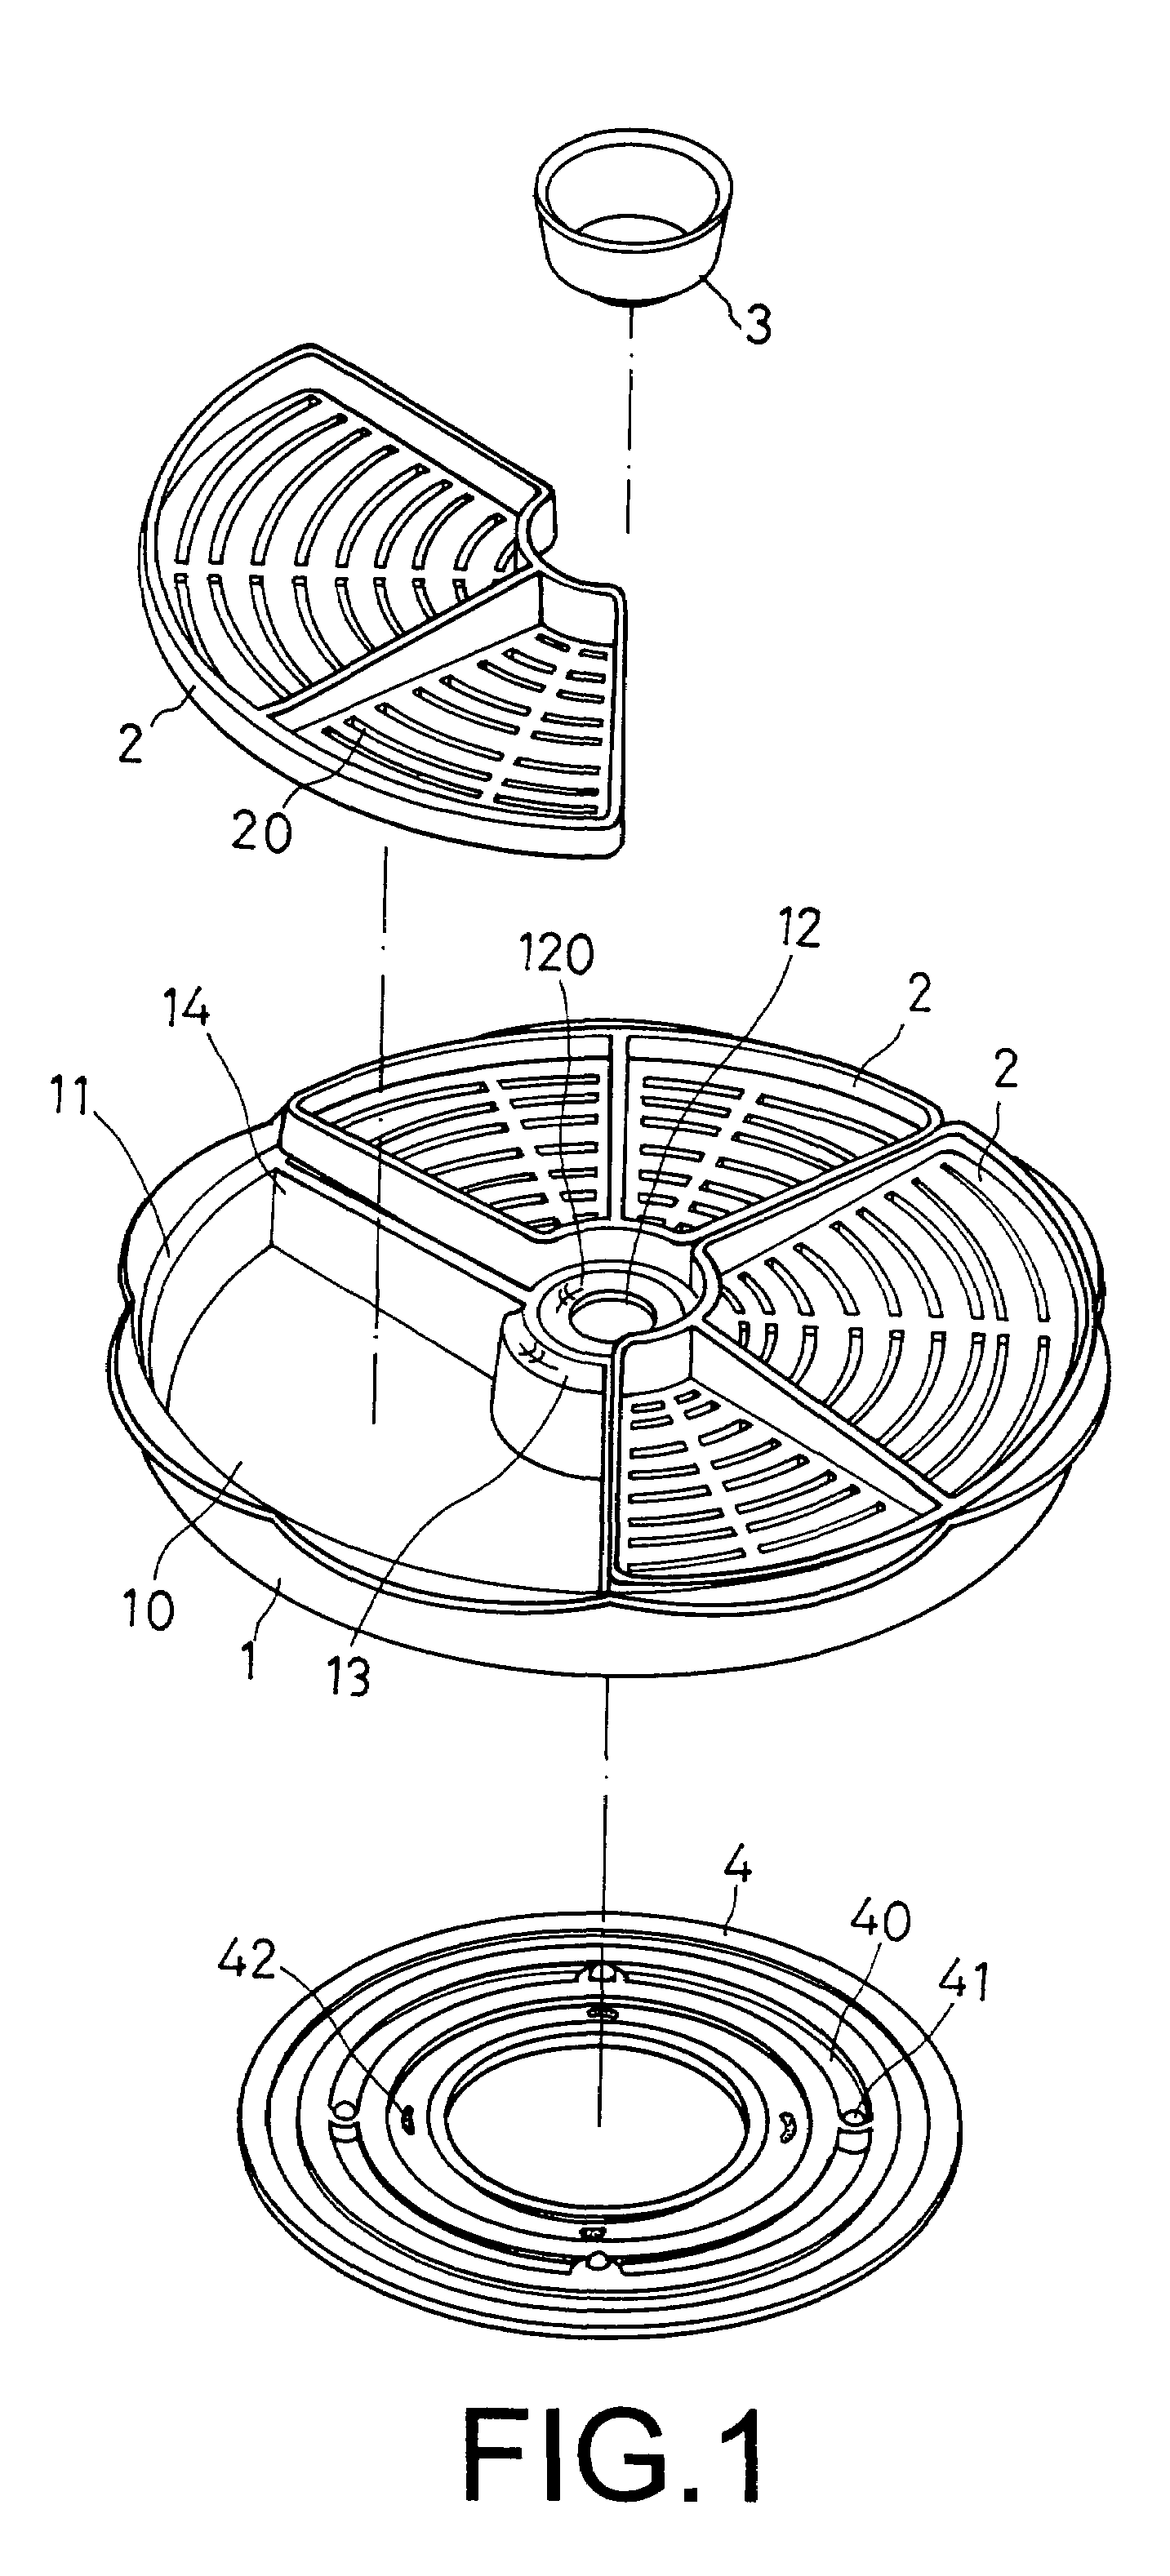 Serving tray with function of keeping food fresh